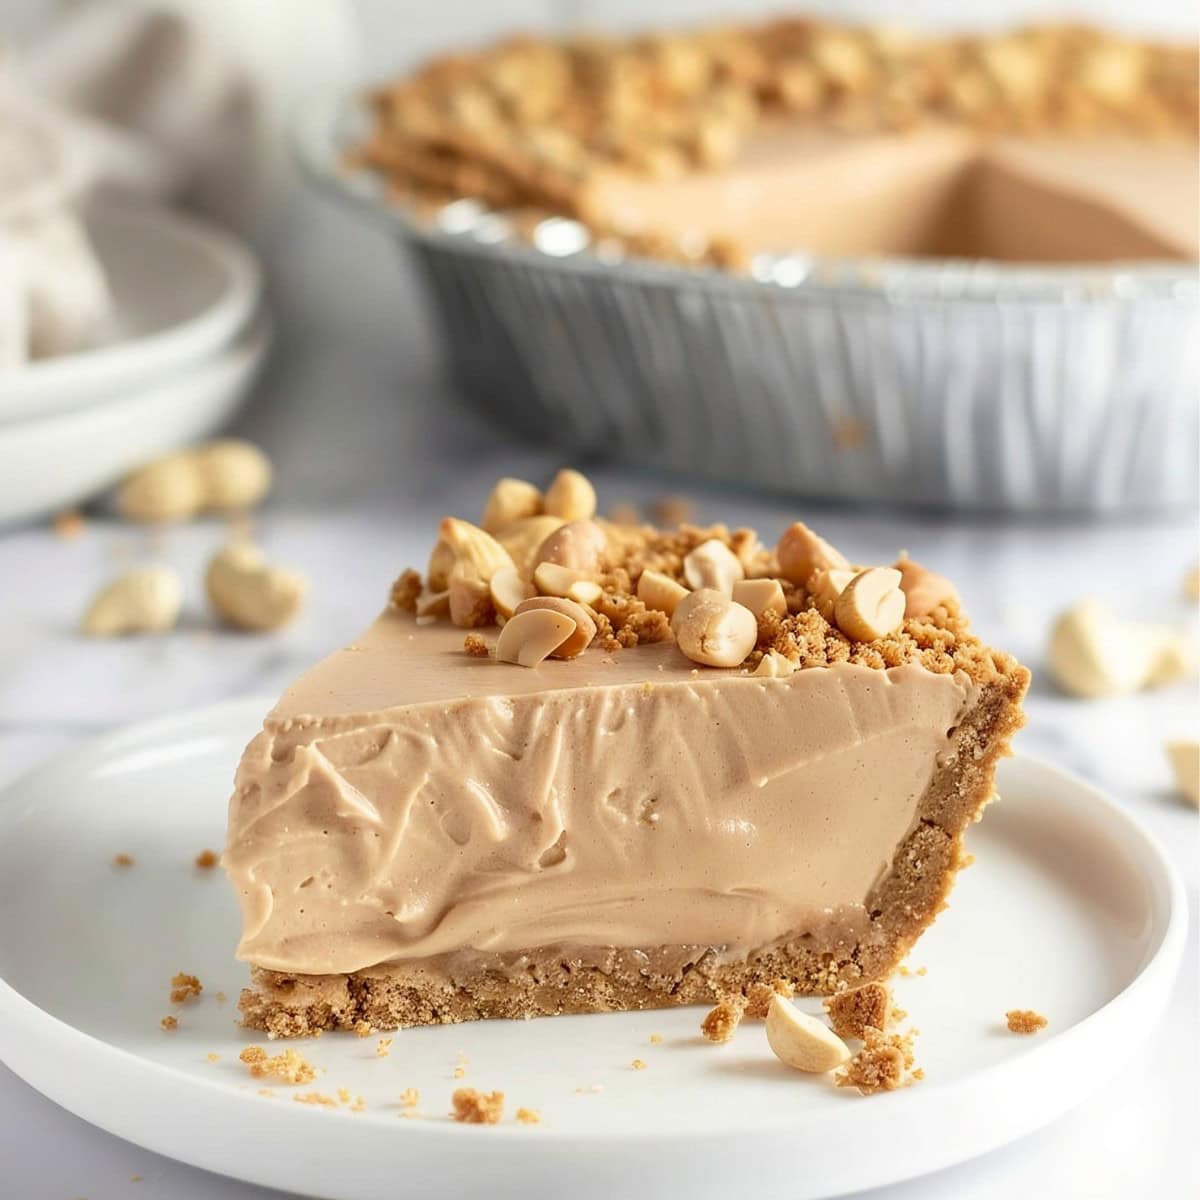 Close up of a Slice of Peanut Butter Cream Pie, Topped with Peanuts and Graham Cracker Crumbles on a White Plate with the Whole Pie in the Background